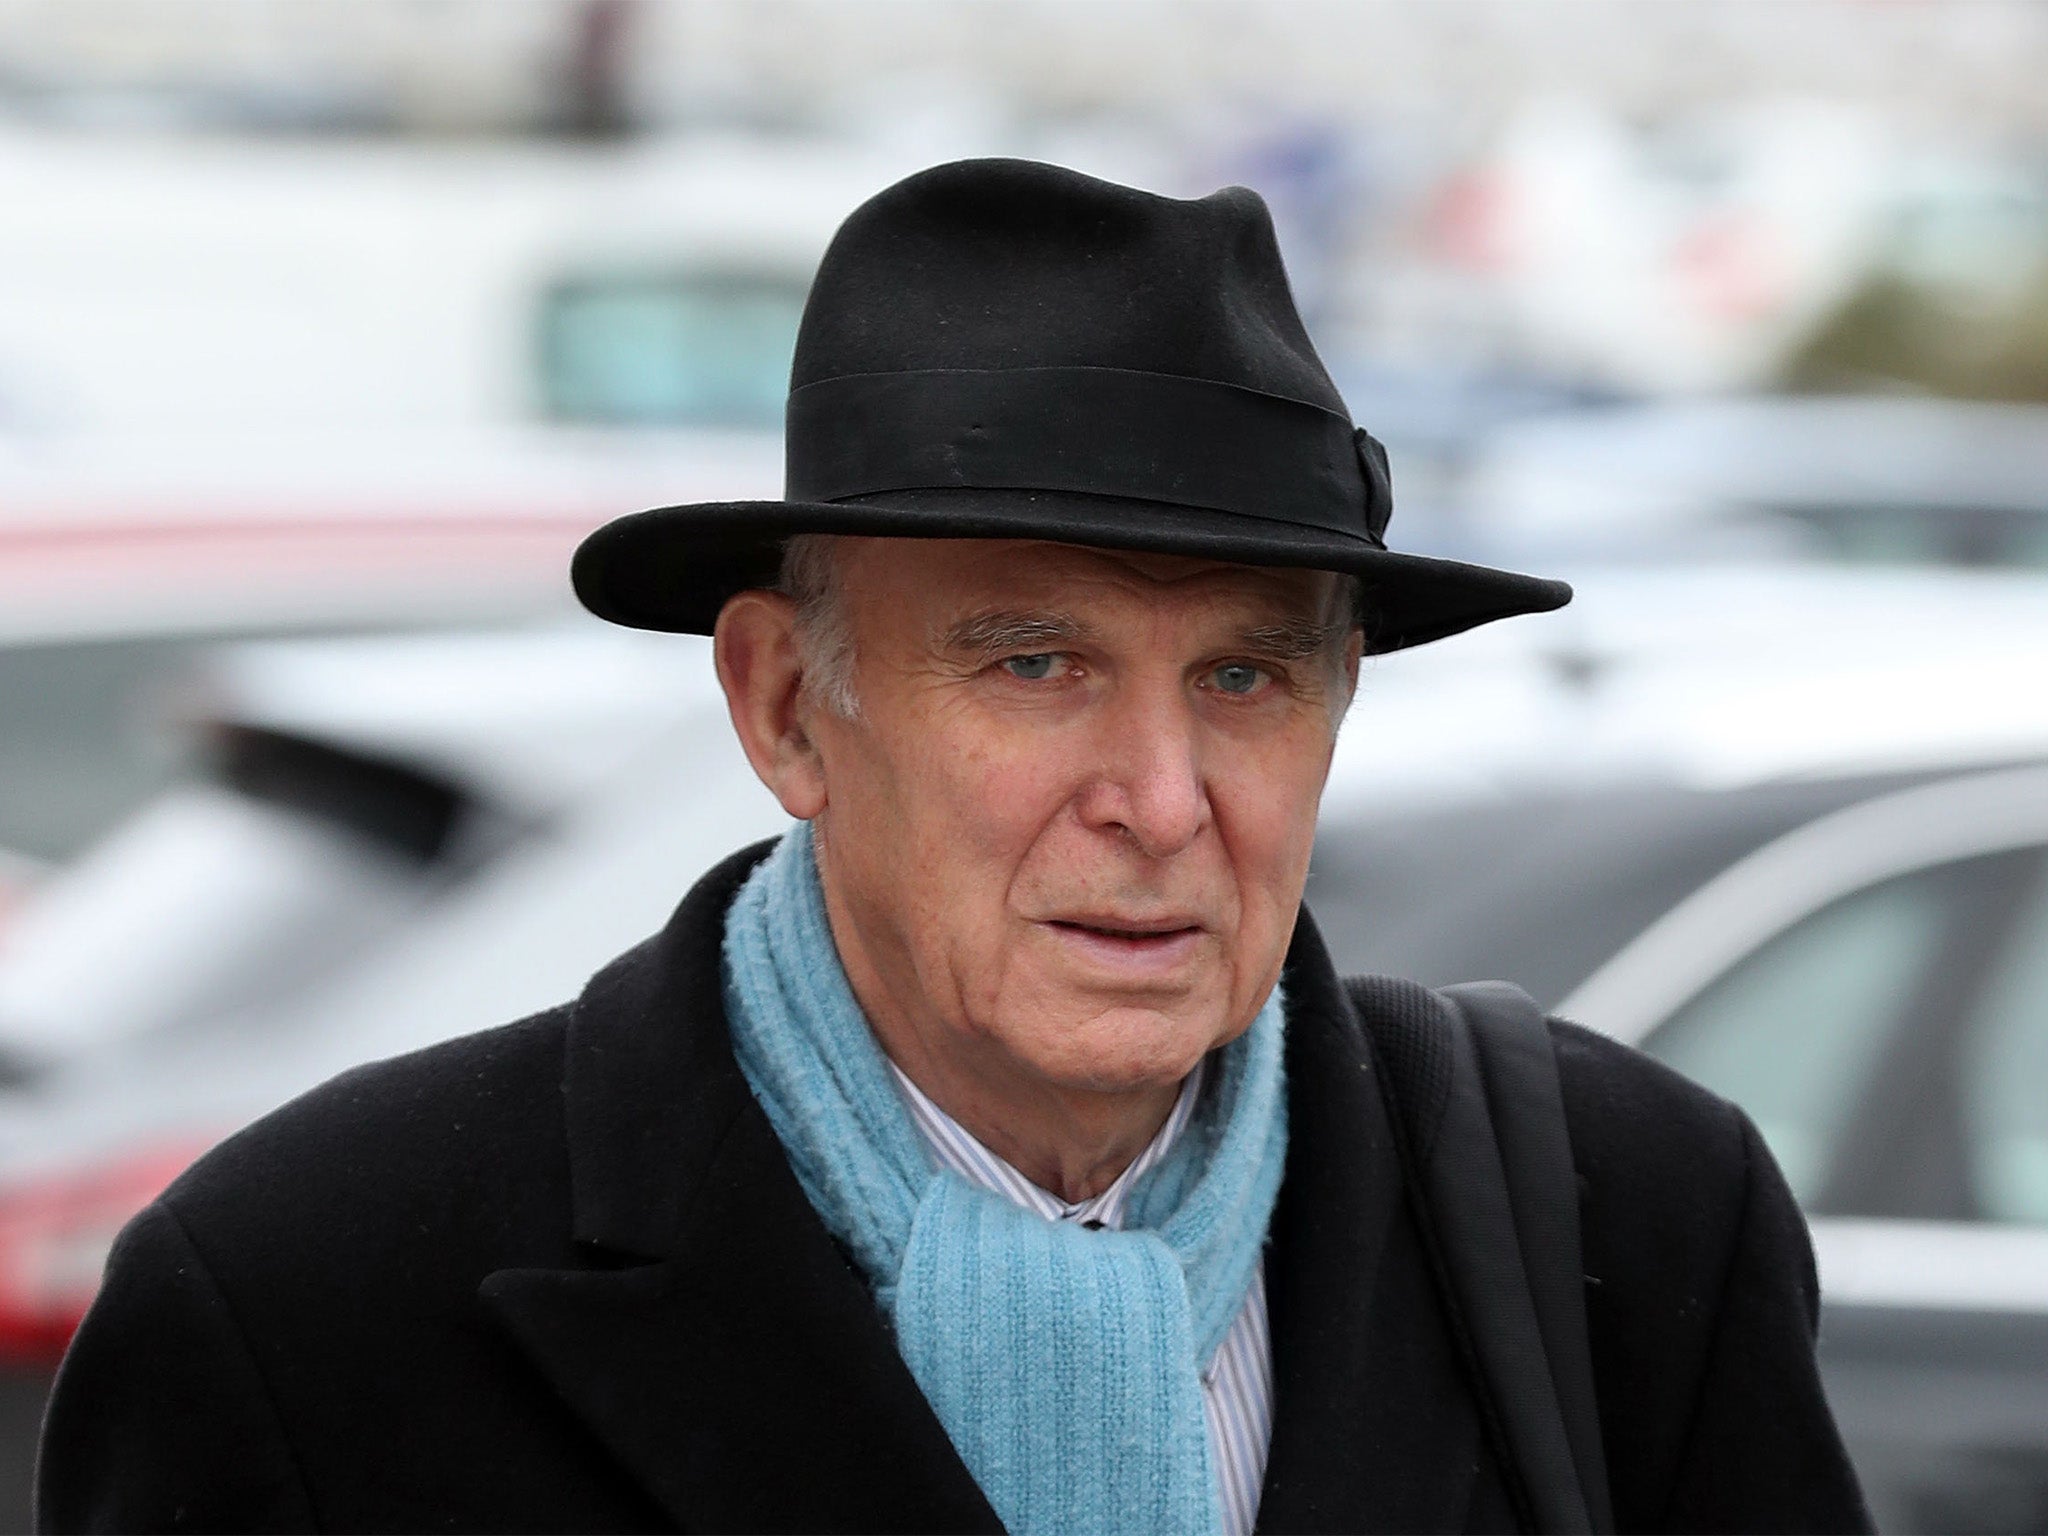 We could have a second referendum before Christmas, believes Vince Cable